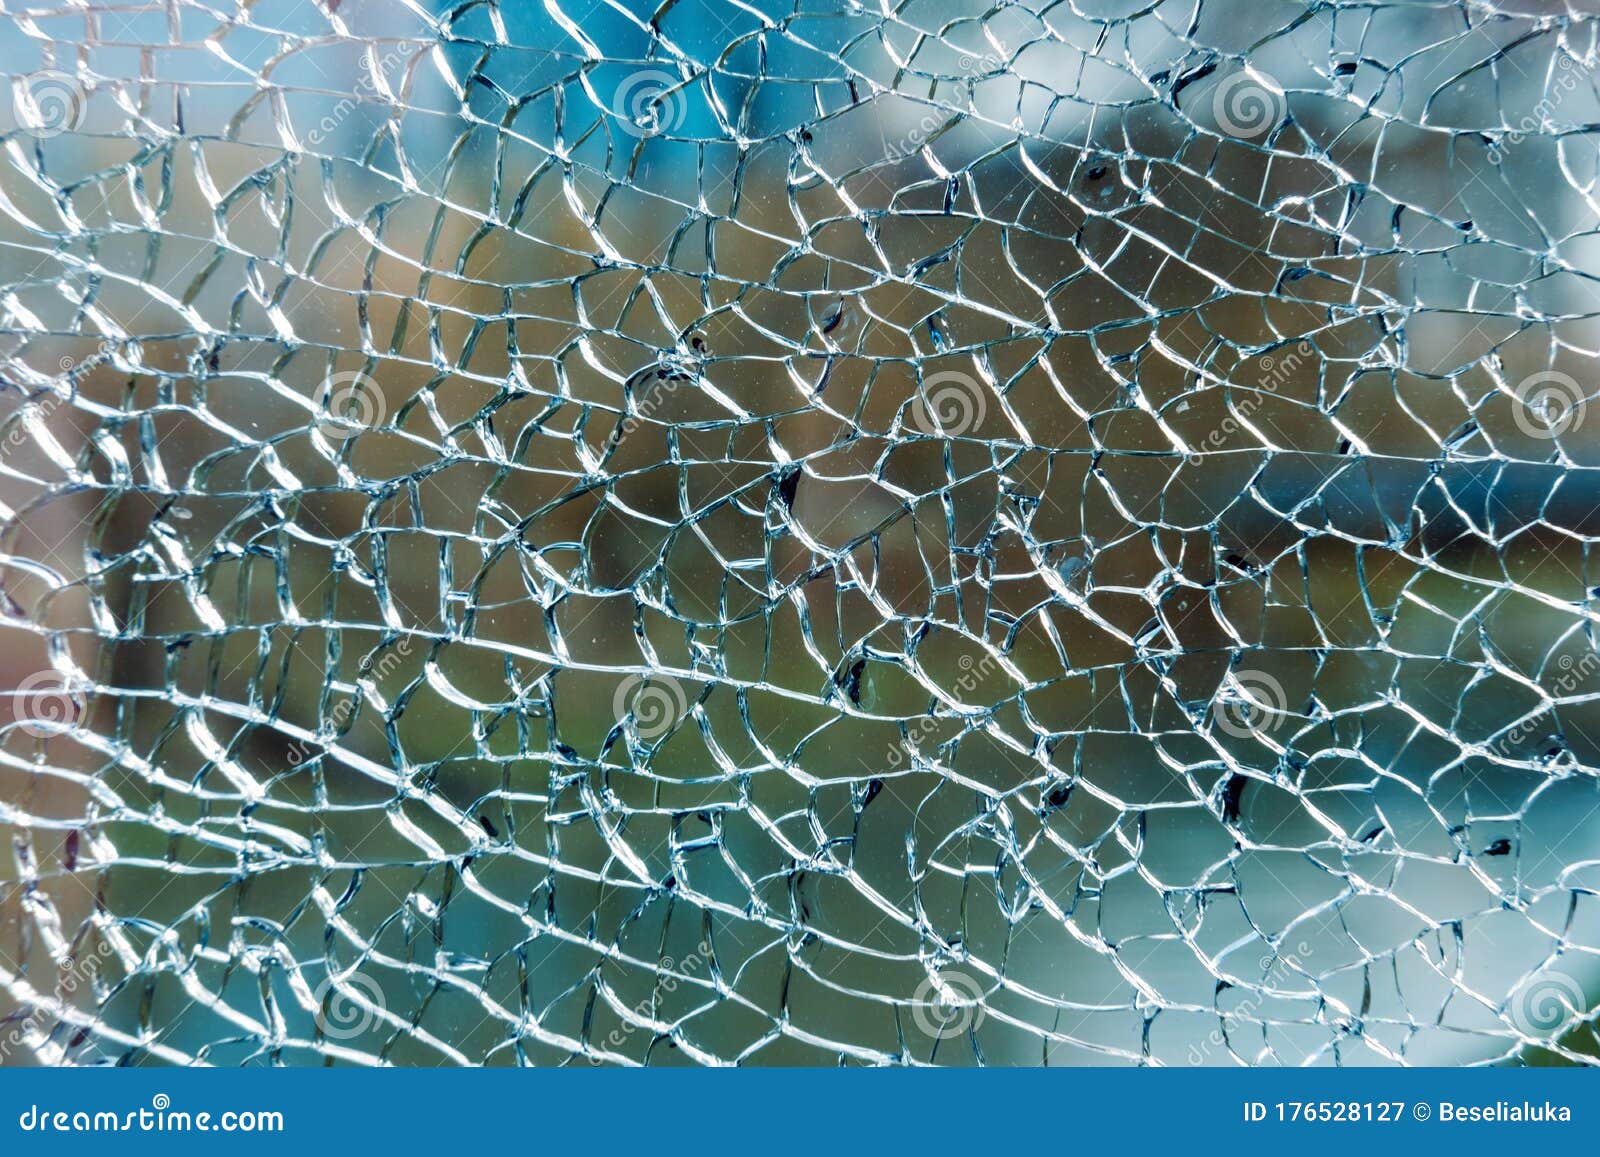 Abstract Texture Of Cracked Broken Glass Stock Image Image Of